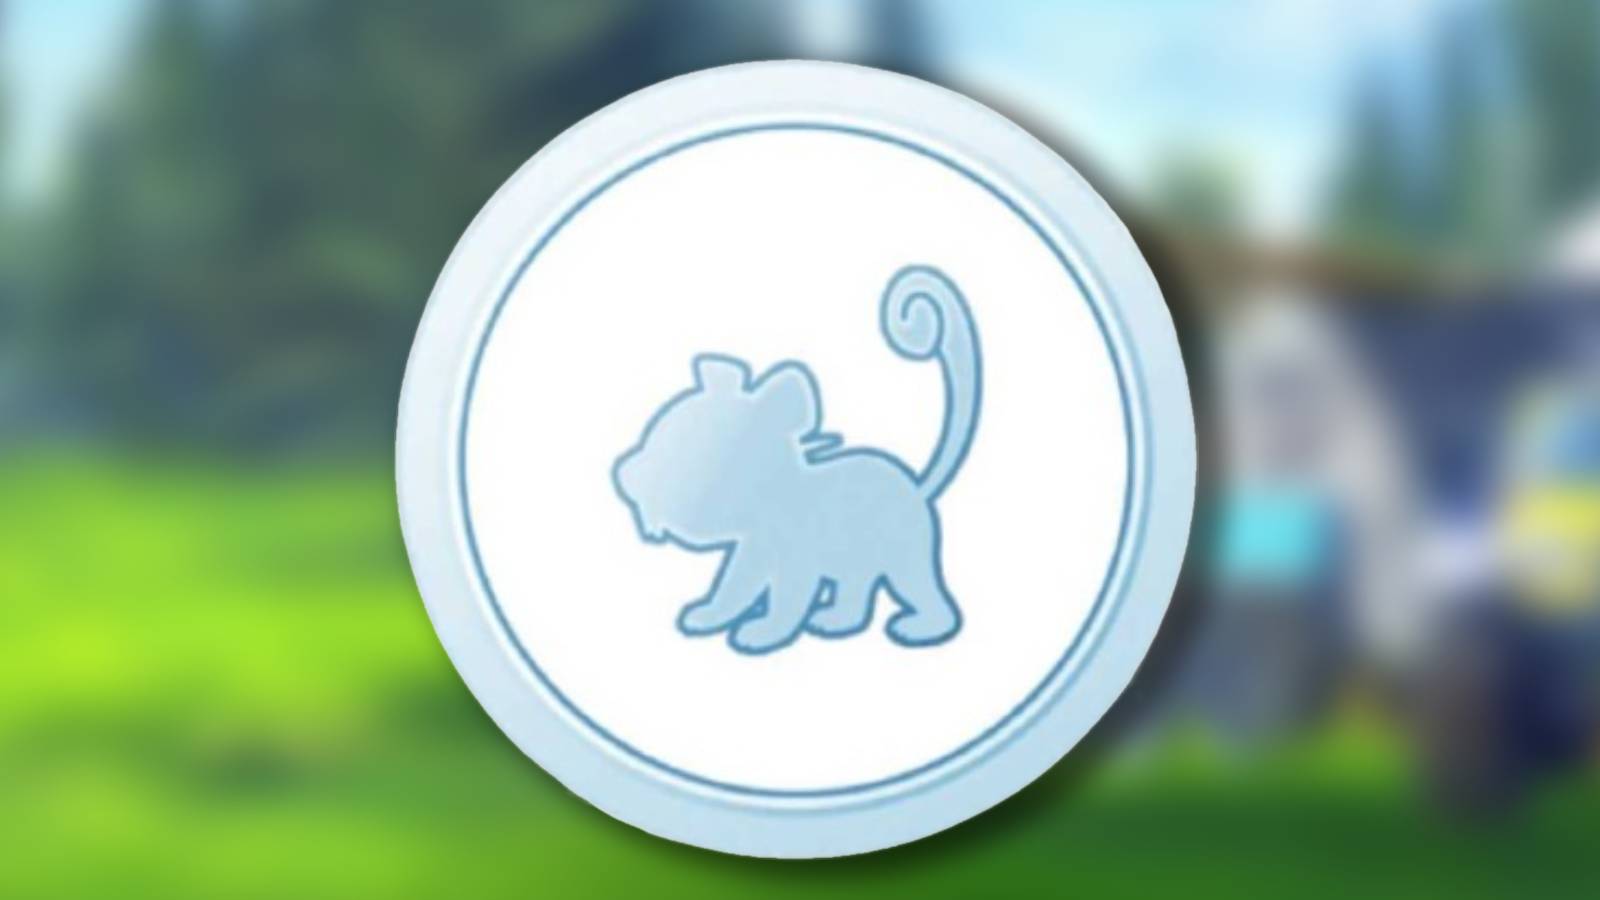 the rattata medla from POkemon Go is shown against a blurred background